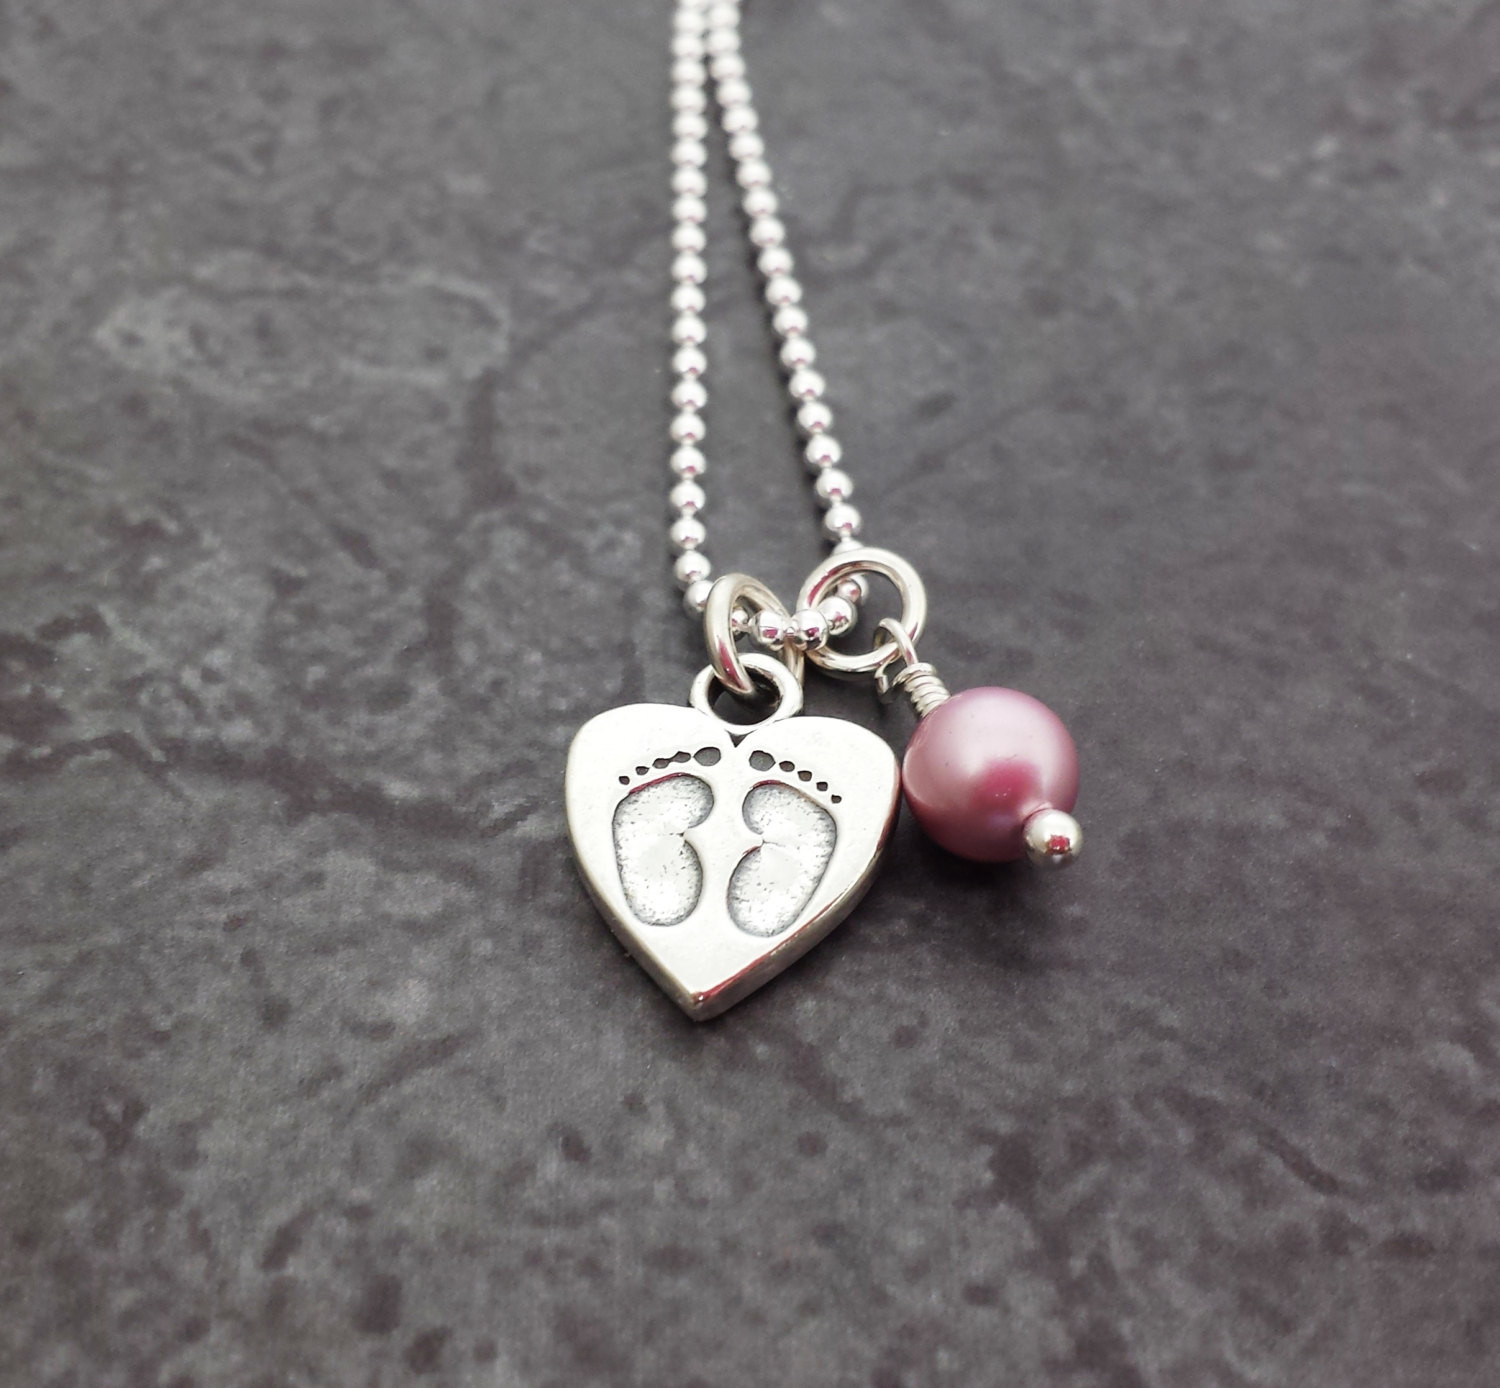 Charm Necklace For Mom
 New Mom Necklace Expectant Mother Baby Feet Heart Charm